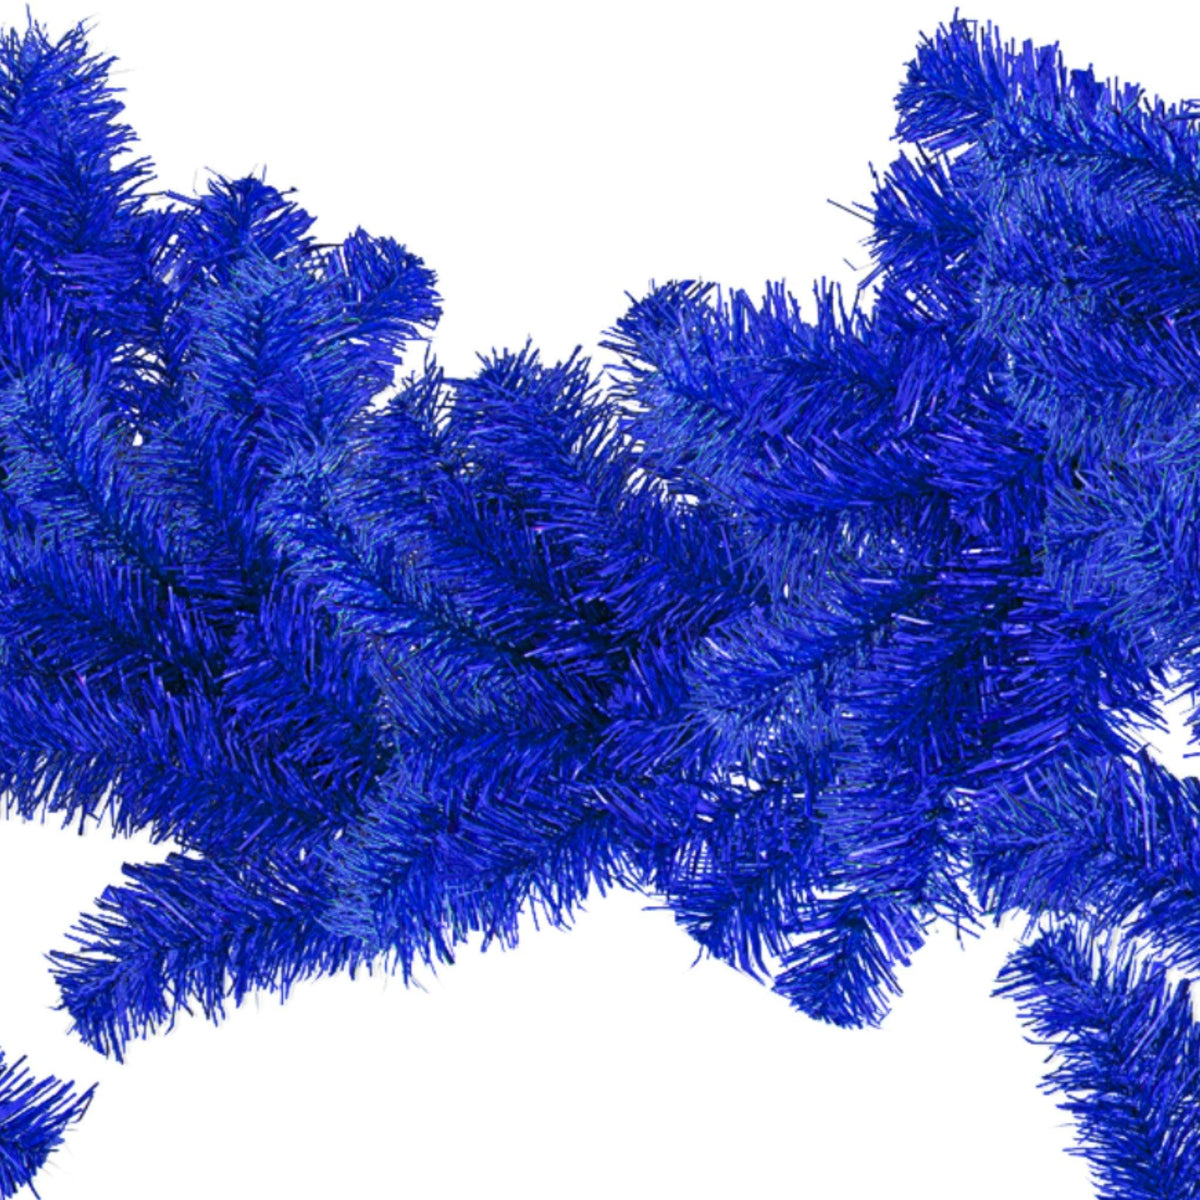 Lee Display's brand new 6FT Blue Tinsel Christmas Garlands on sale at leedisplay.com.  Middle section